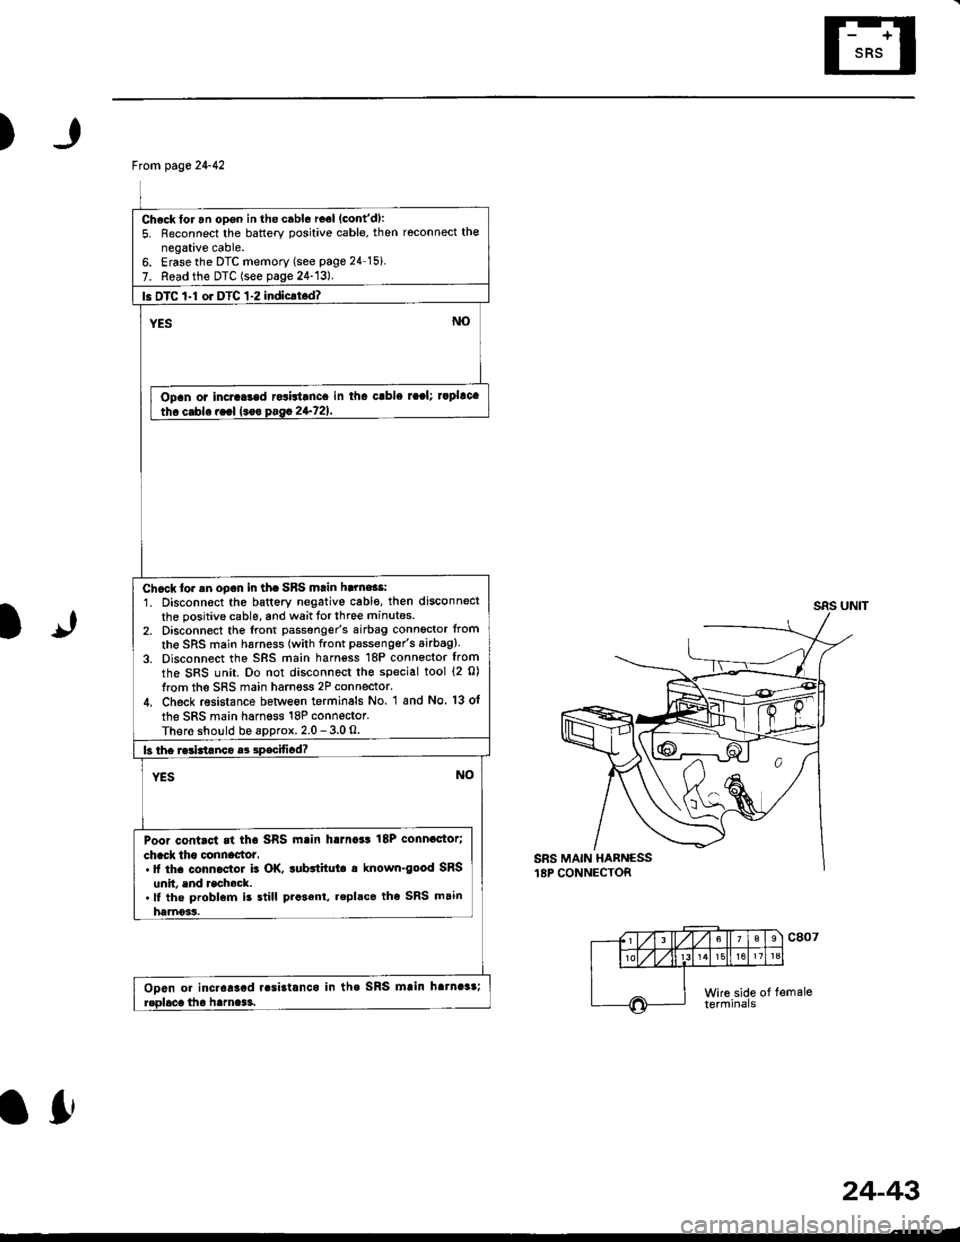 HONDA CIVIC 1996 6.G Service Manual )
1J
From page 24-42
Check for an opgn in the cabl6 reel (contd):
5. Reconnect the battery positive cable, then roconnect the
negative cable.6. Erasethe DTC memory (see page 24 15i
7. Read the DTC (s